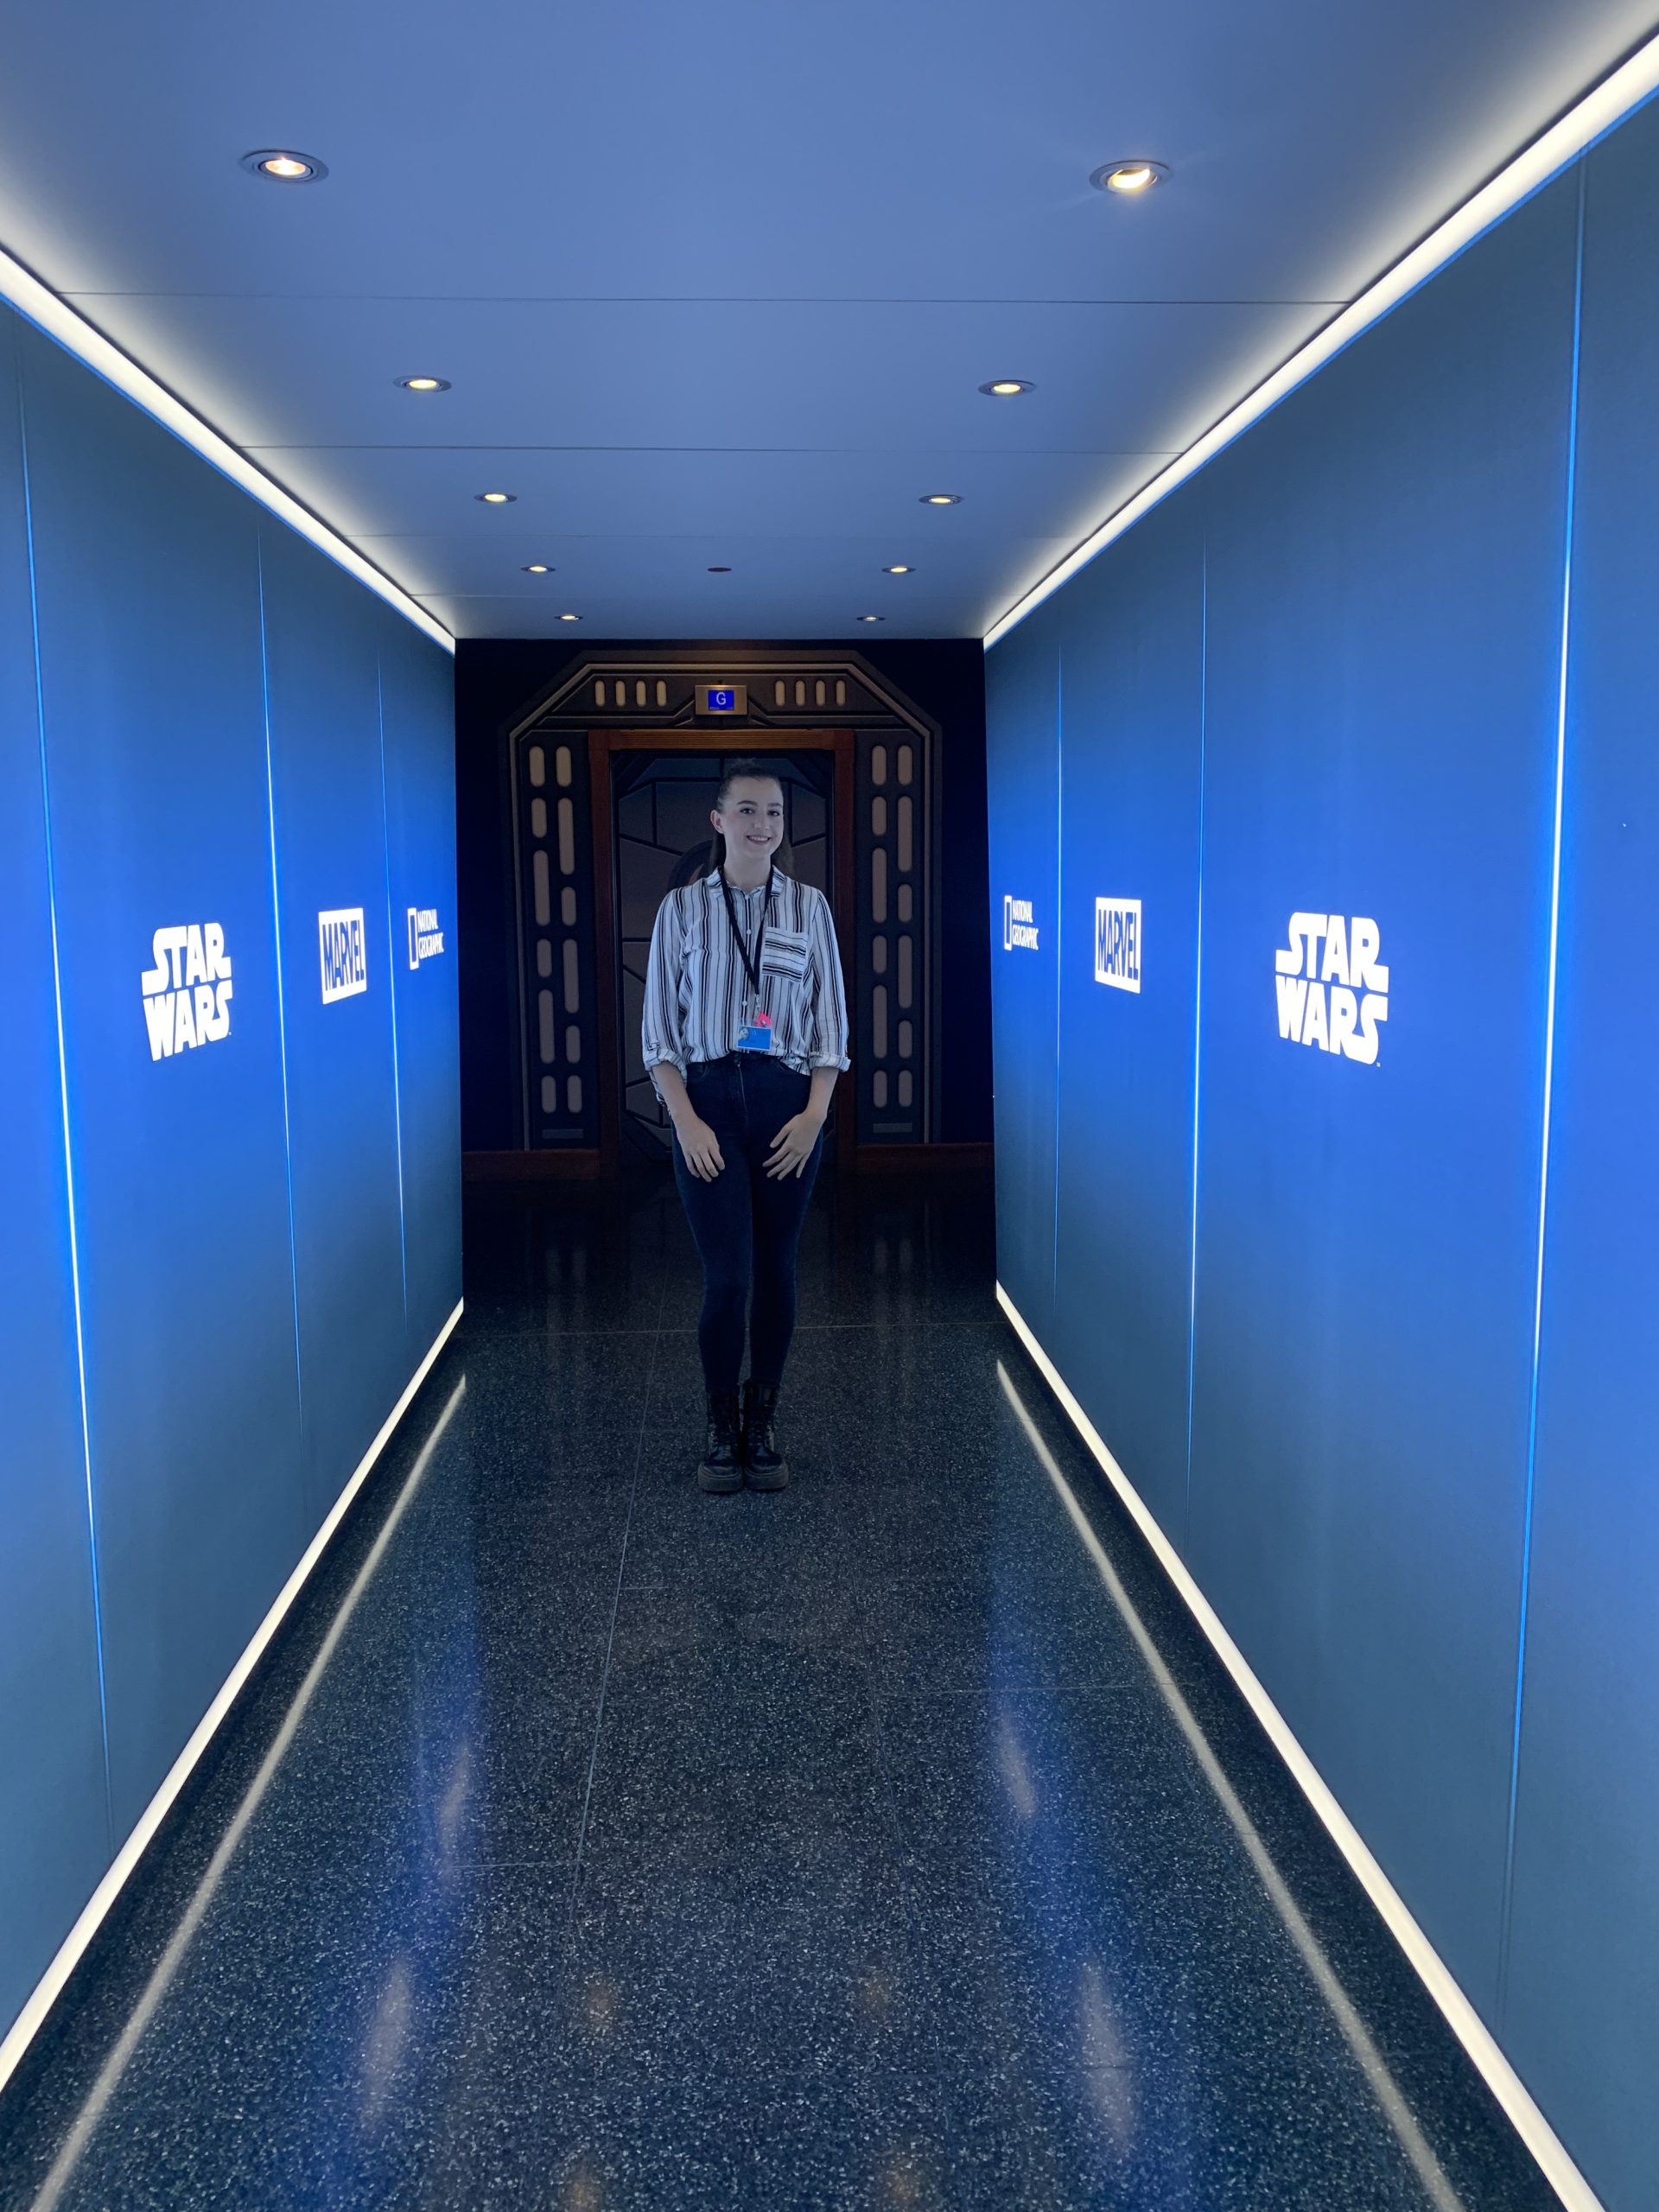 Photo of Karla, Marketing and Publicity Intern for The Walt Disney Studios, in a hallway with Studios logos.